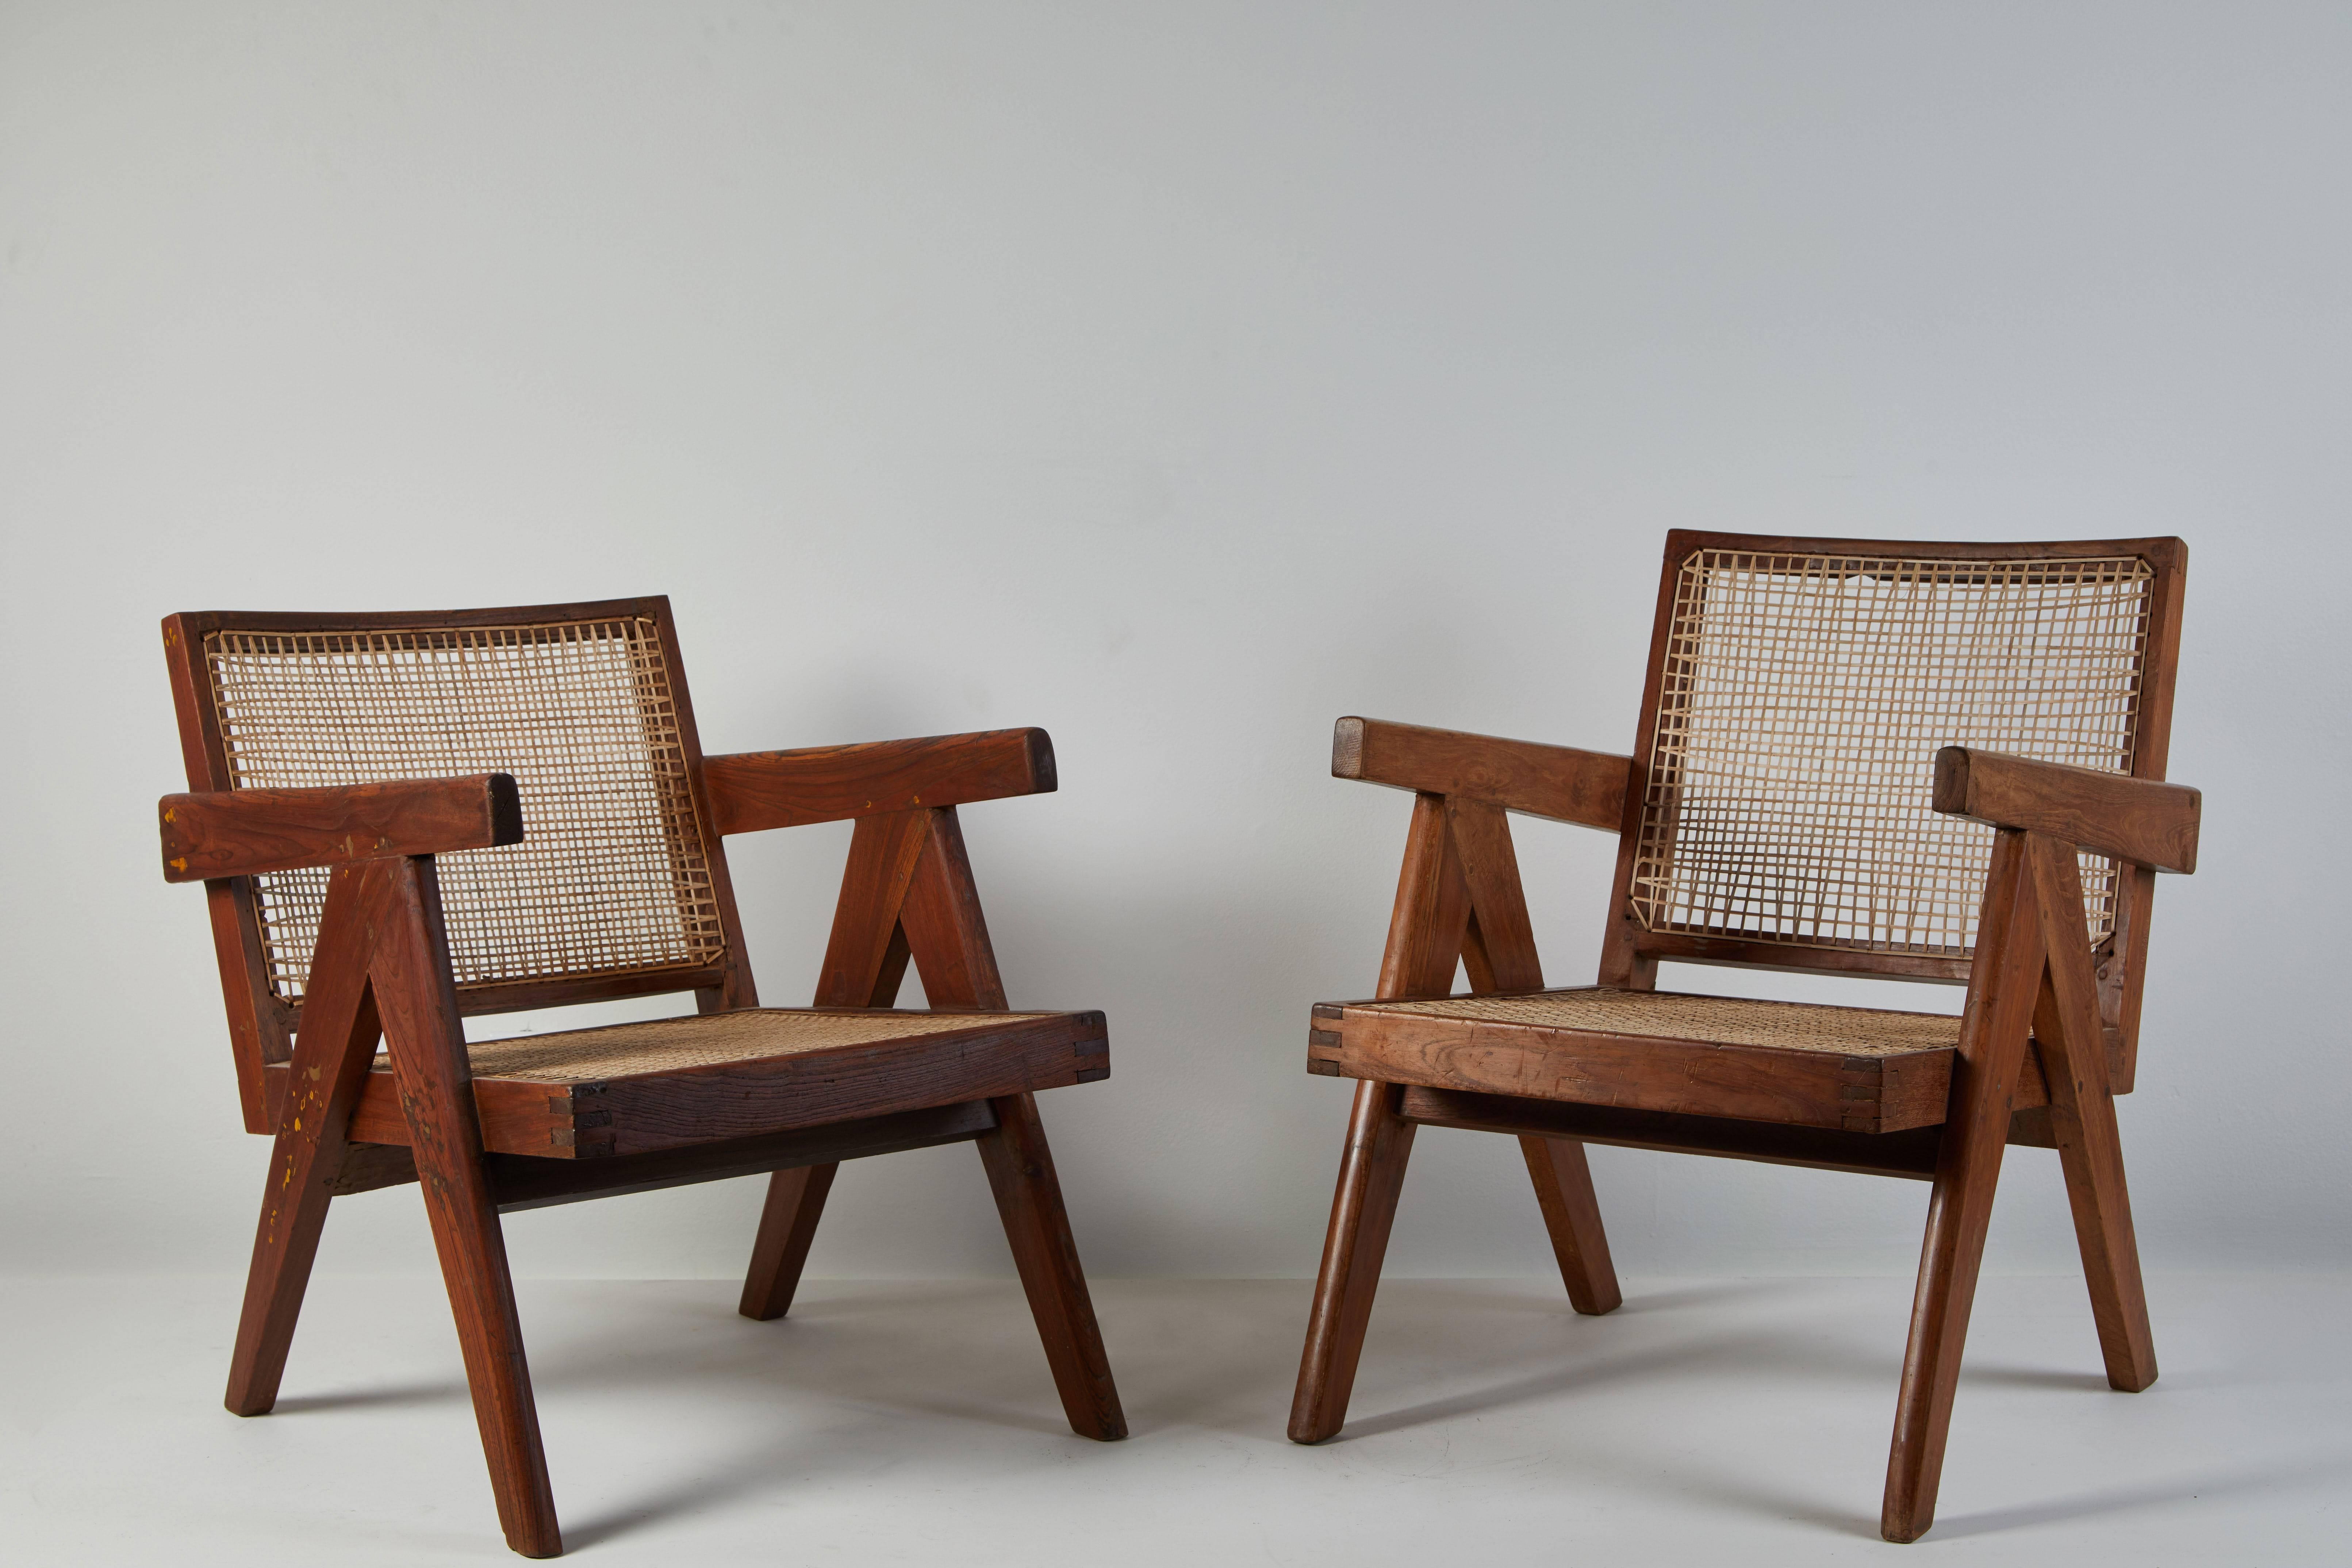 Cane and teak Easy Armchairs by Pierre Jeanneret for Punjab University in Chandigarh. Made in India/France circa 1956.

Available with cushion.
